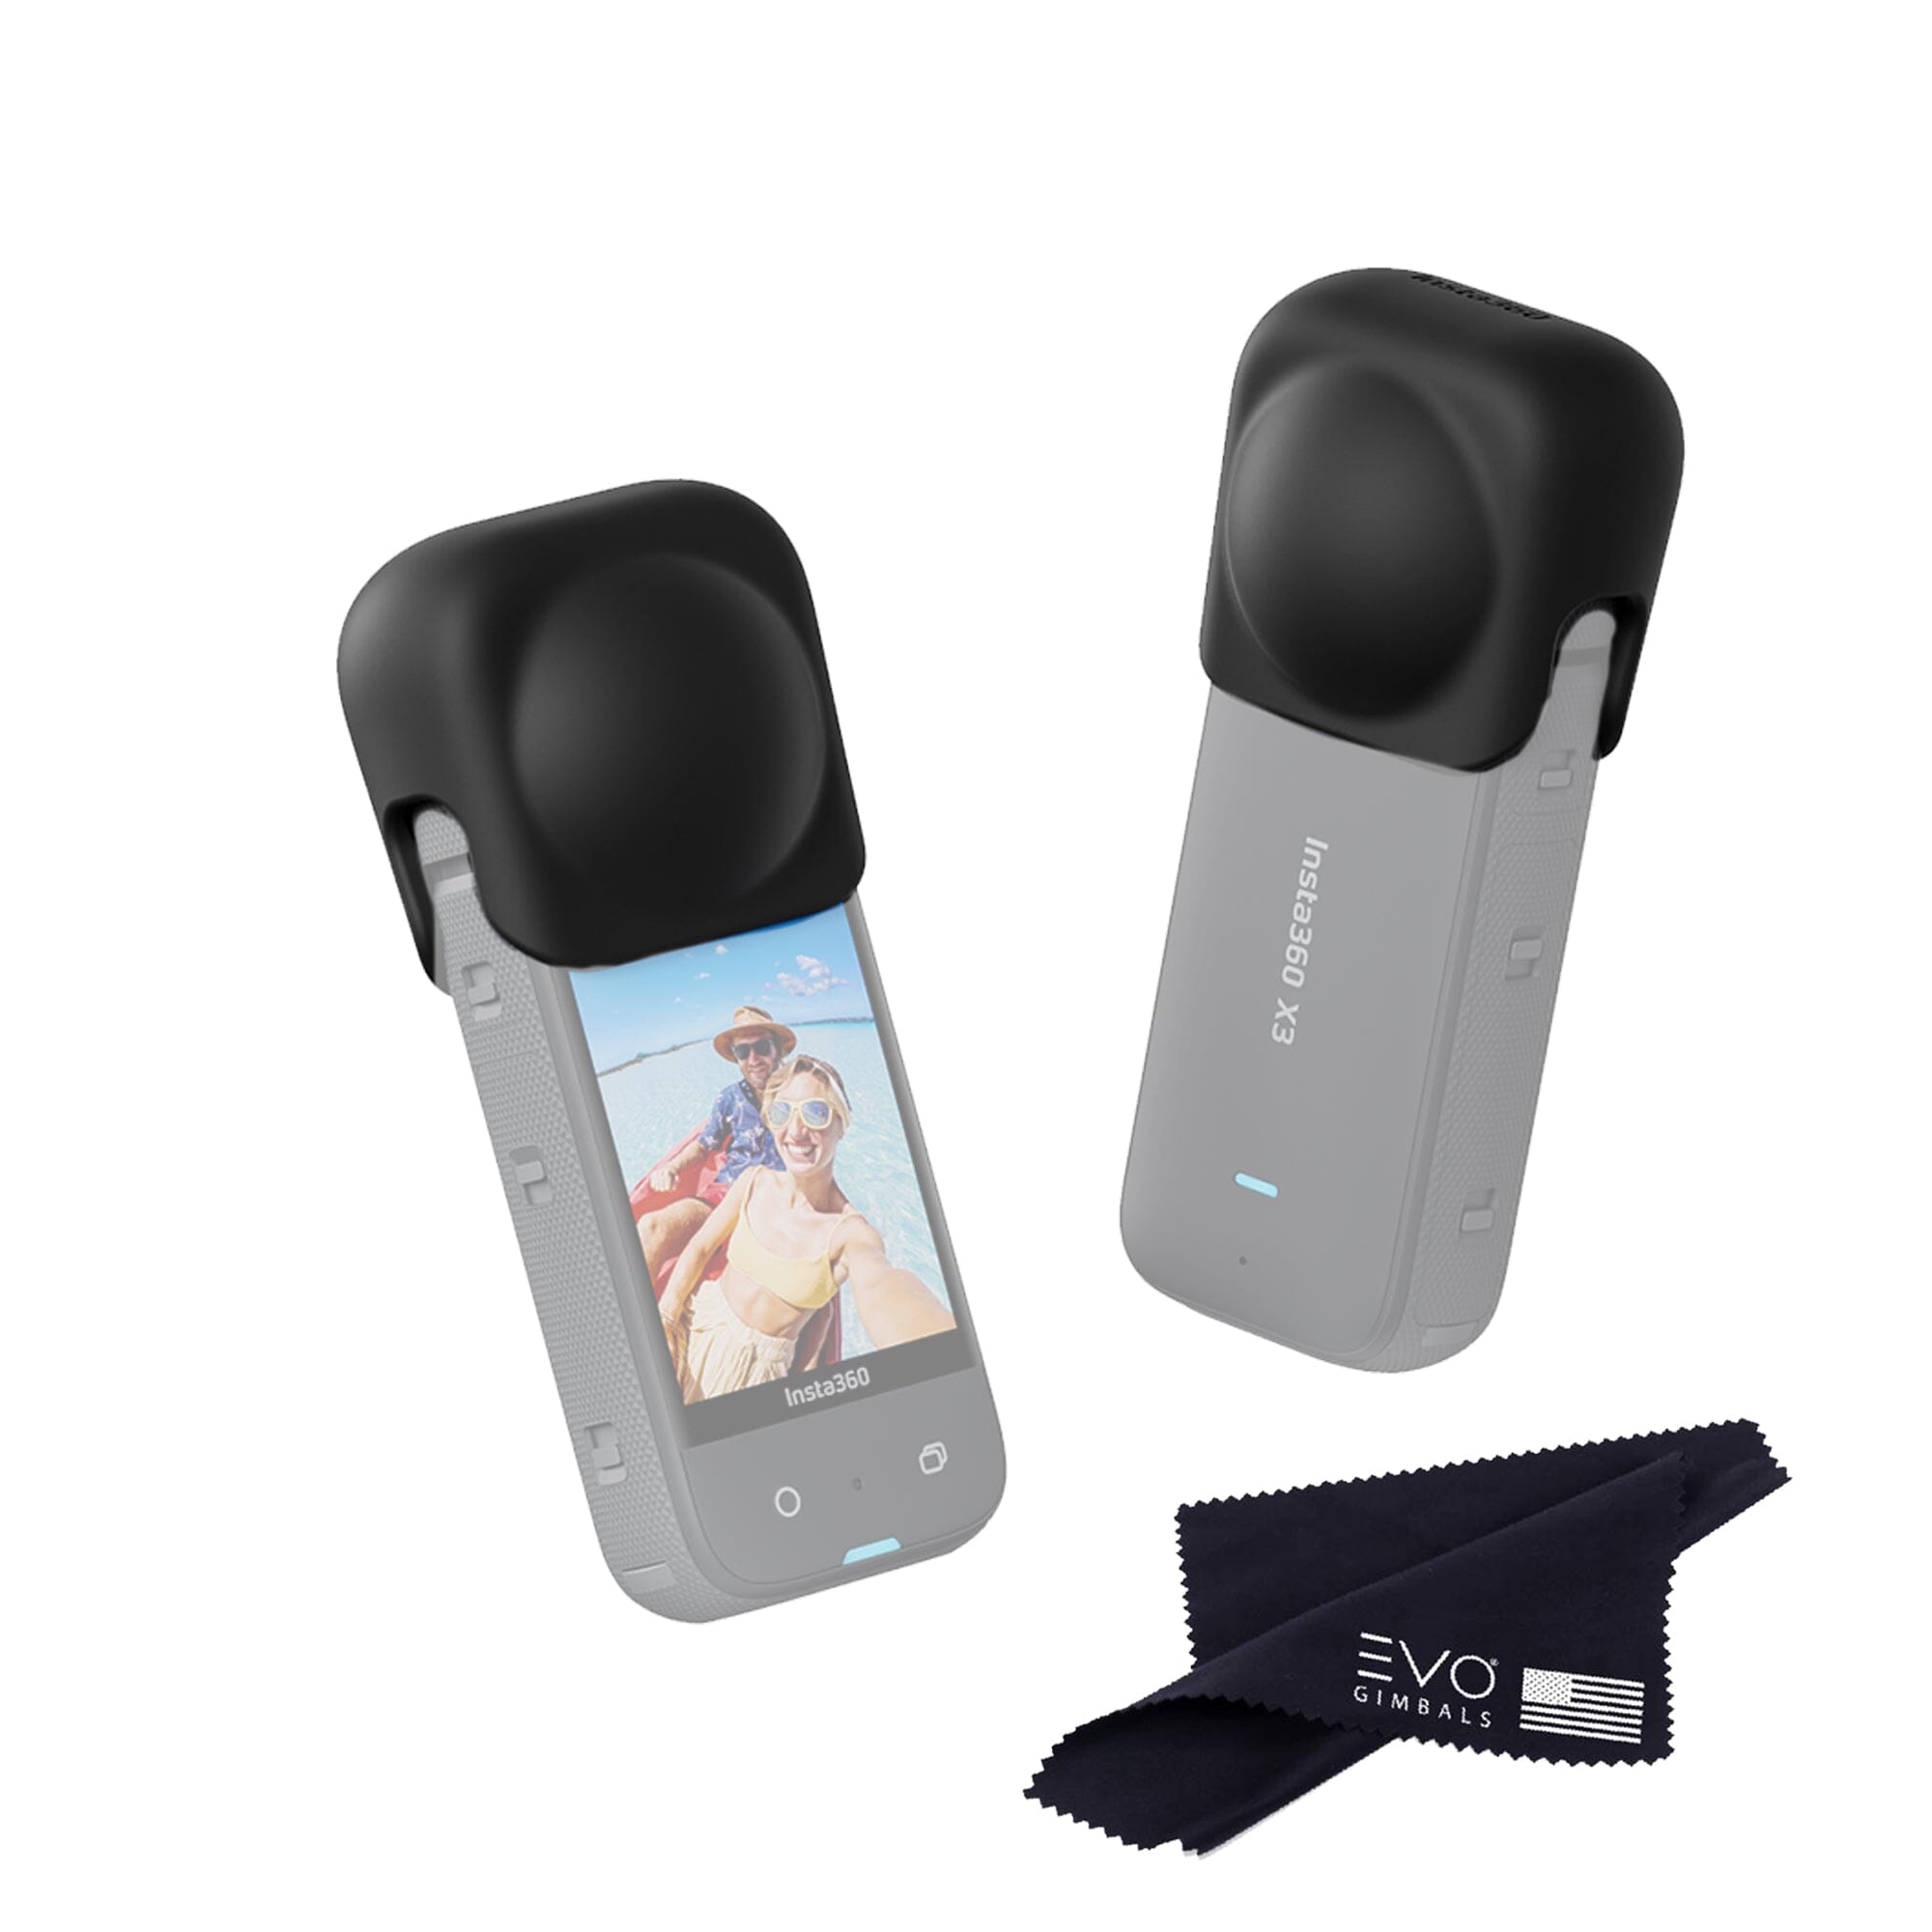 INSTA360 X3 - Buy, Rent, Pay in Installments